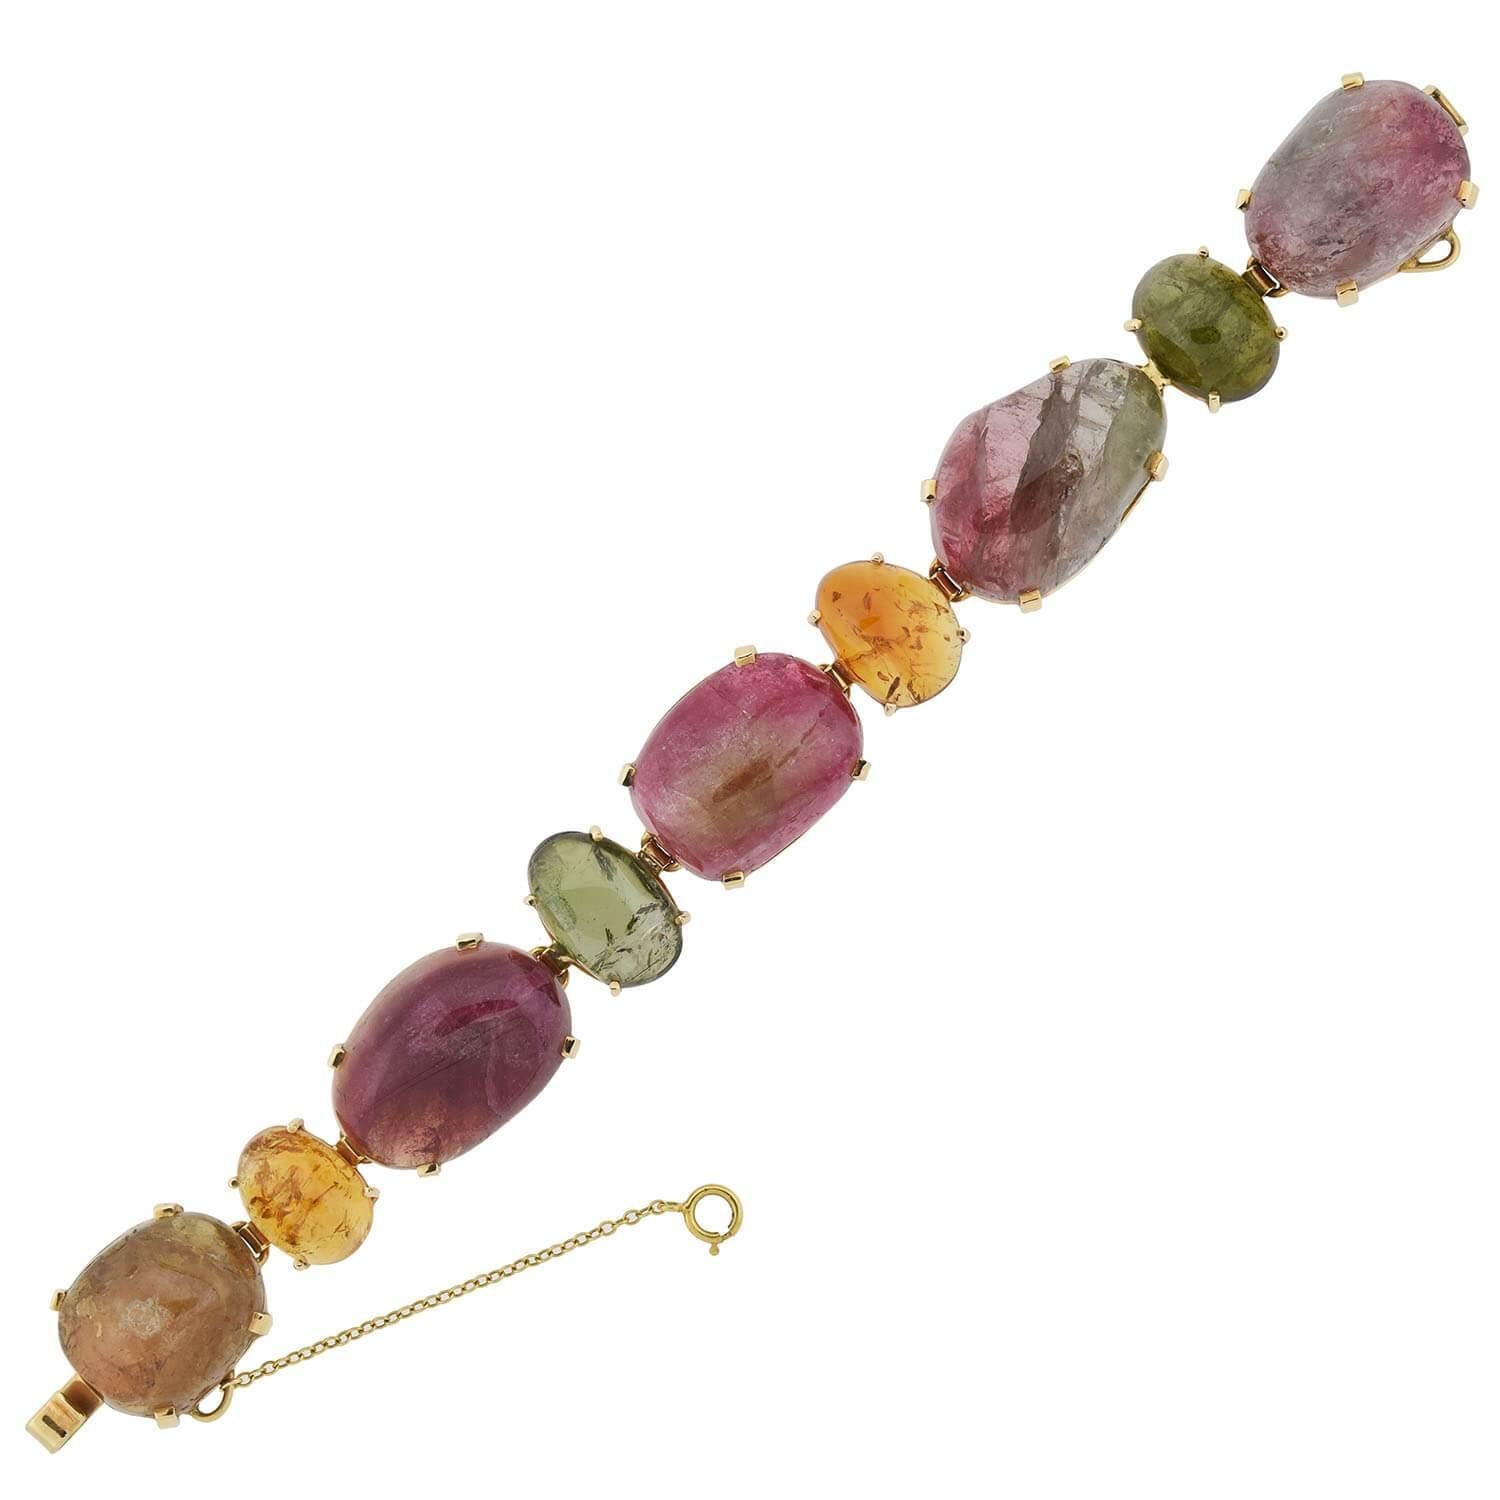 An incredible and unique Vintage multi-colored tourmaline link Maine bracelet from the 1950s era! This bold piece features 9 substantial natural stone links that rest in a 14kt yellow gold setting, each one connected together to create a straight